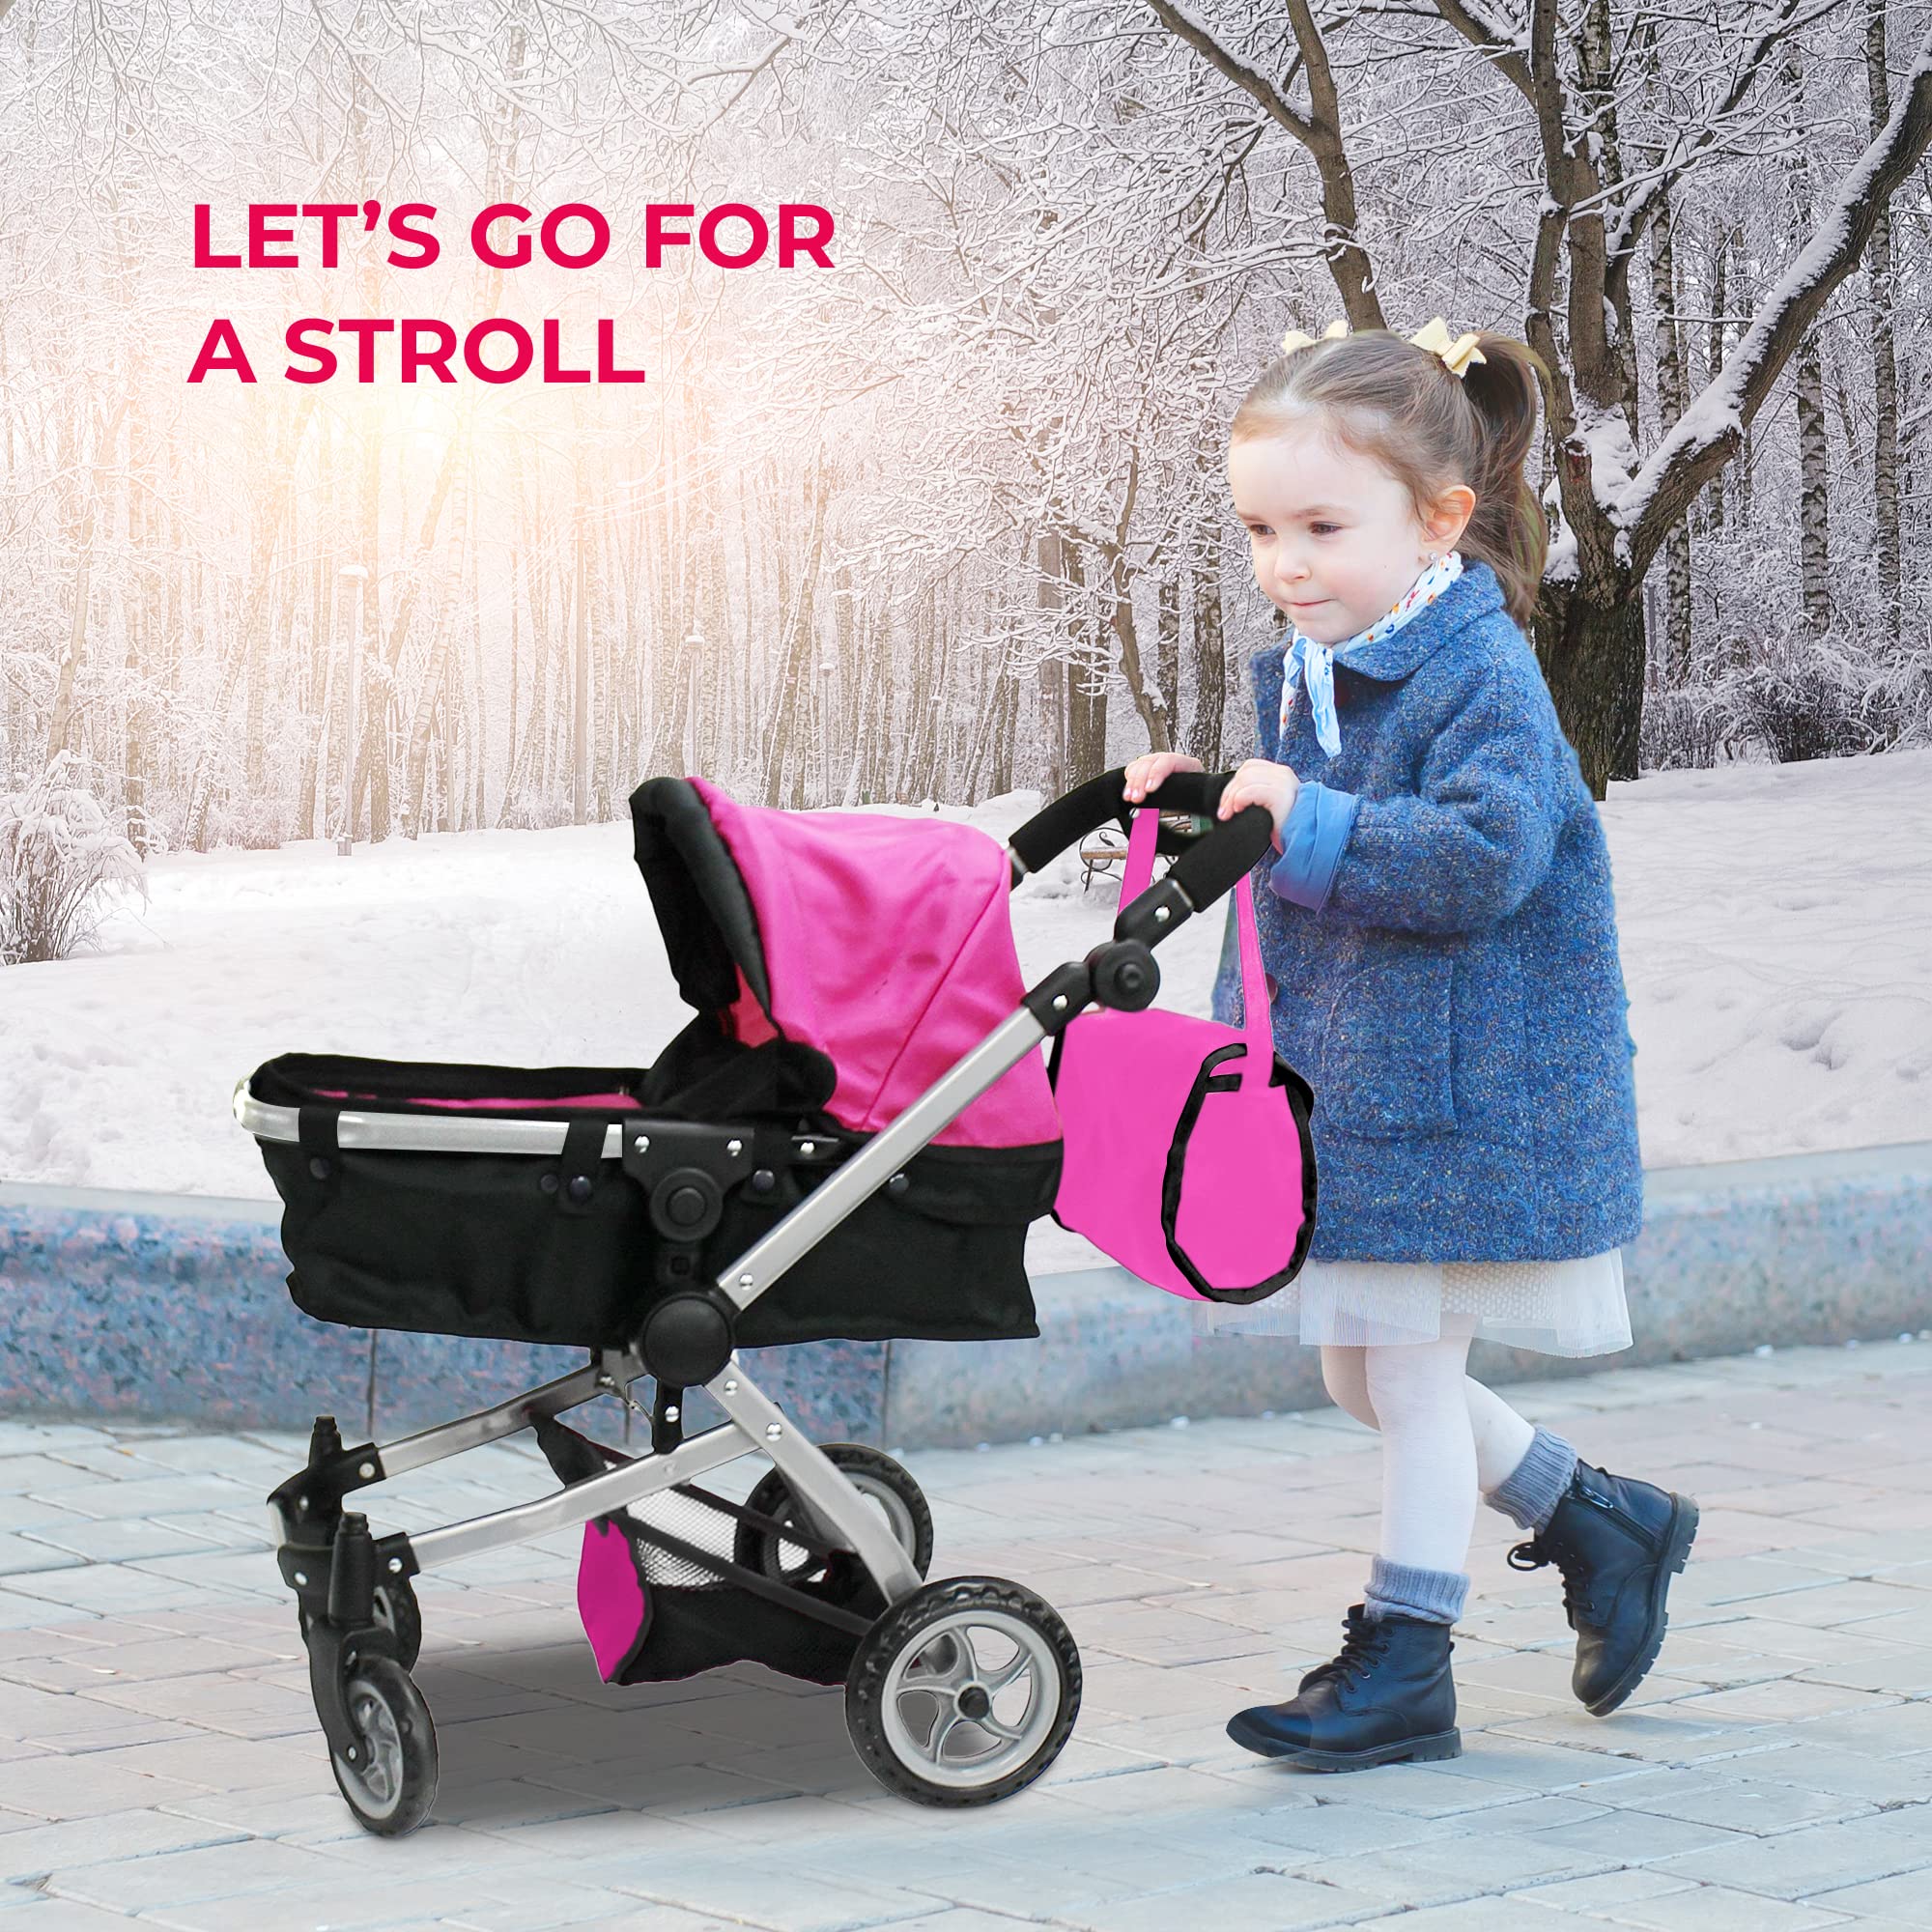 Mommy & me 2 in 1 Deluxe Doll Stroller Extra Tall 32'' HIGH (View All Photos) 9695